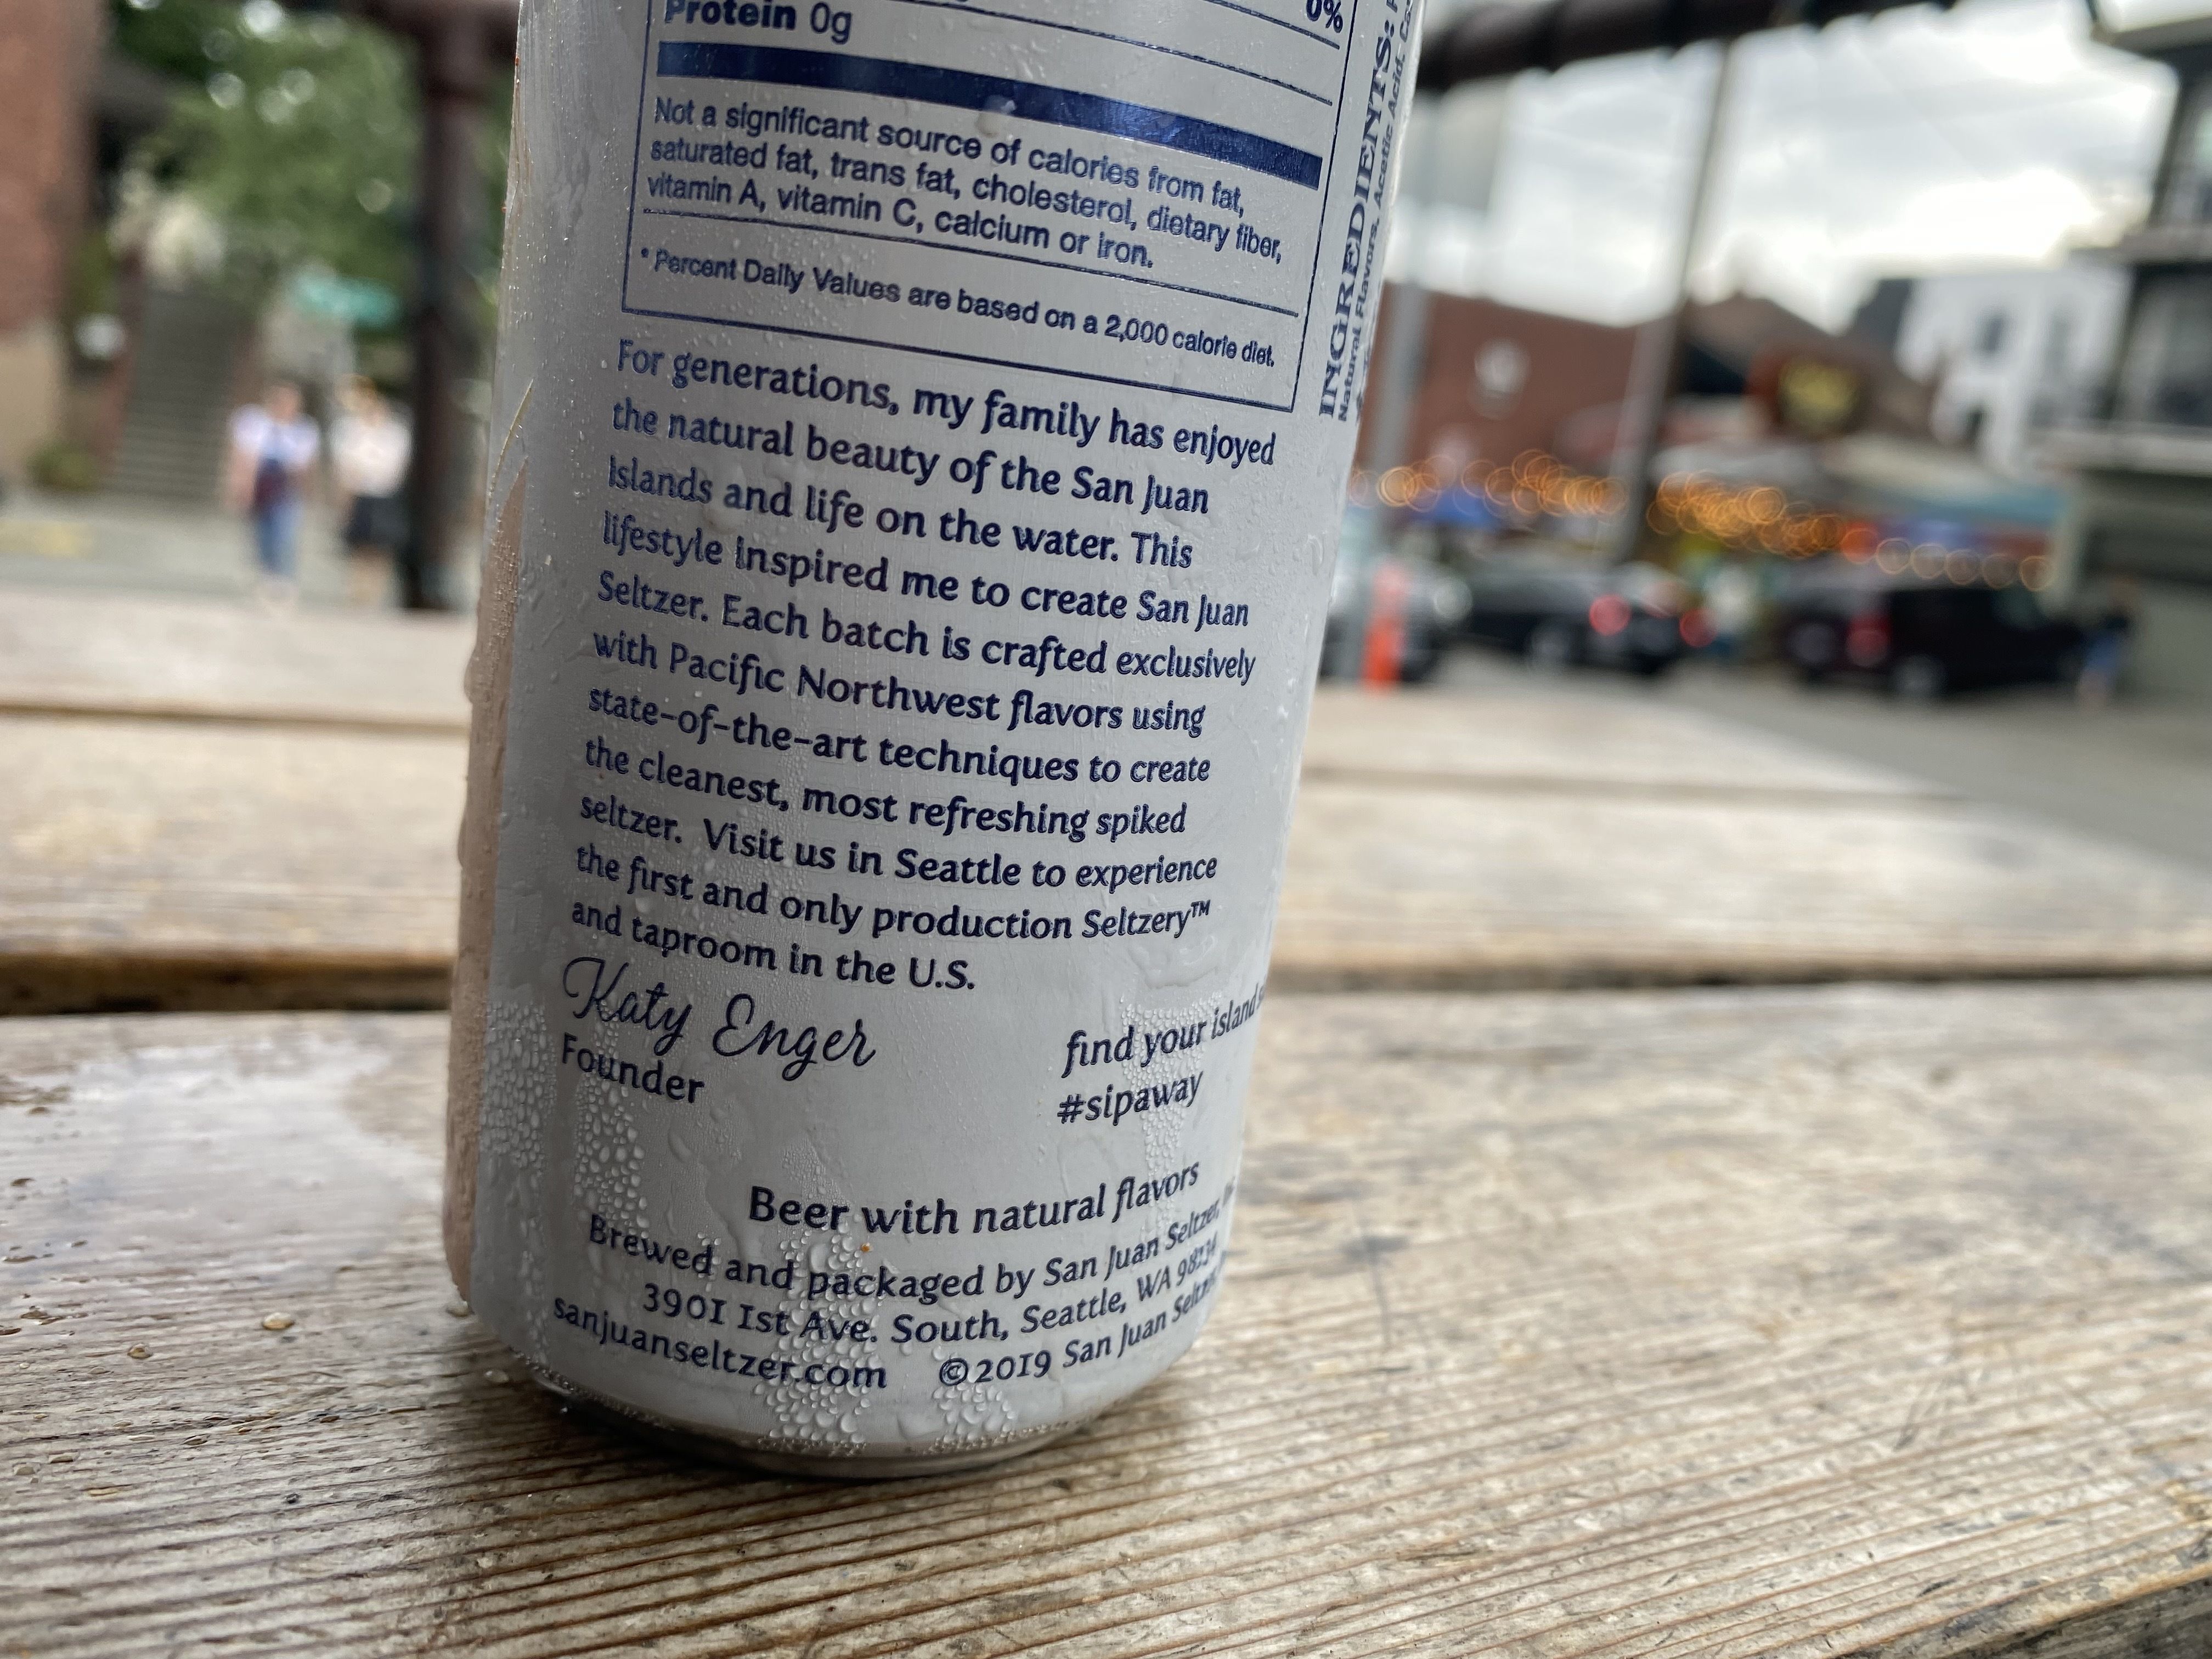 A can of seltzer that says "each batch is crafted exclusively with Pacific Northwest flavors using state of the art techniques."